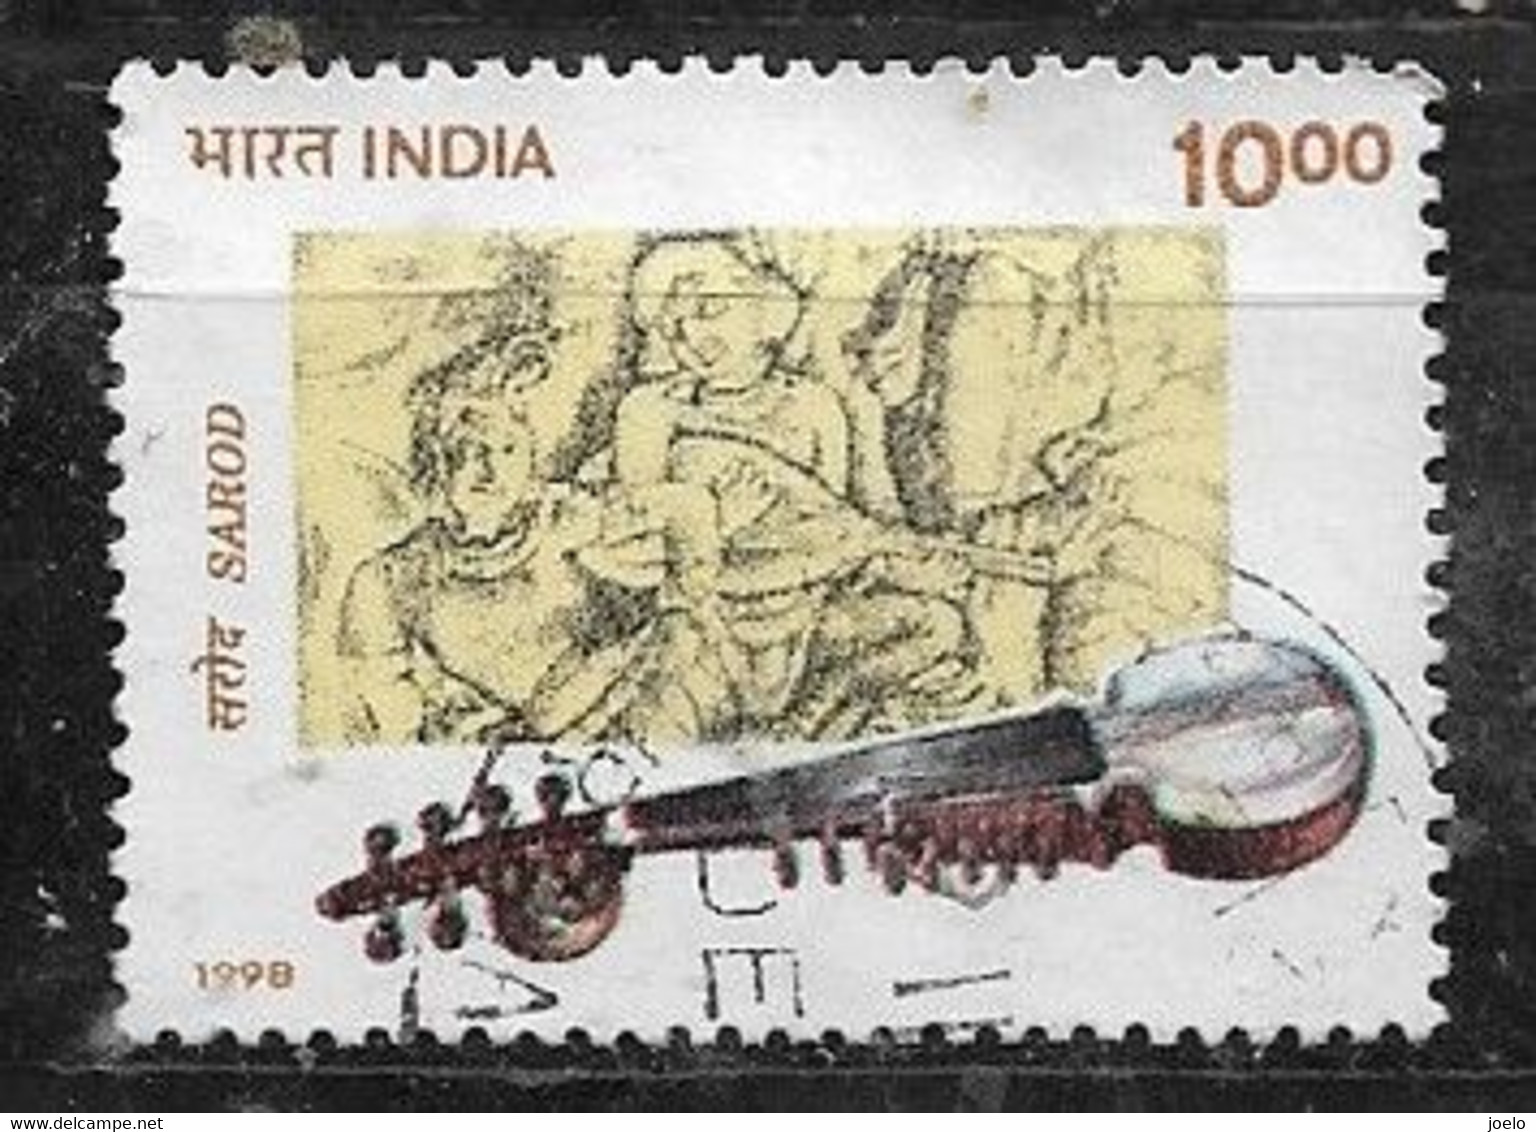 INDIA 1998 MUSICAL INSTRUMENT - Used Stamps